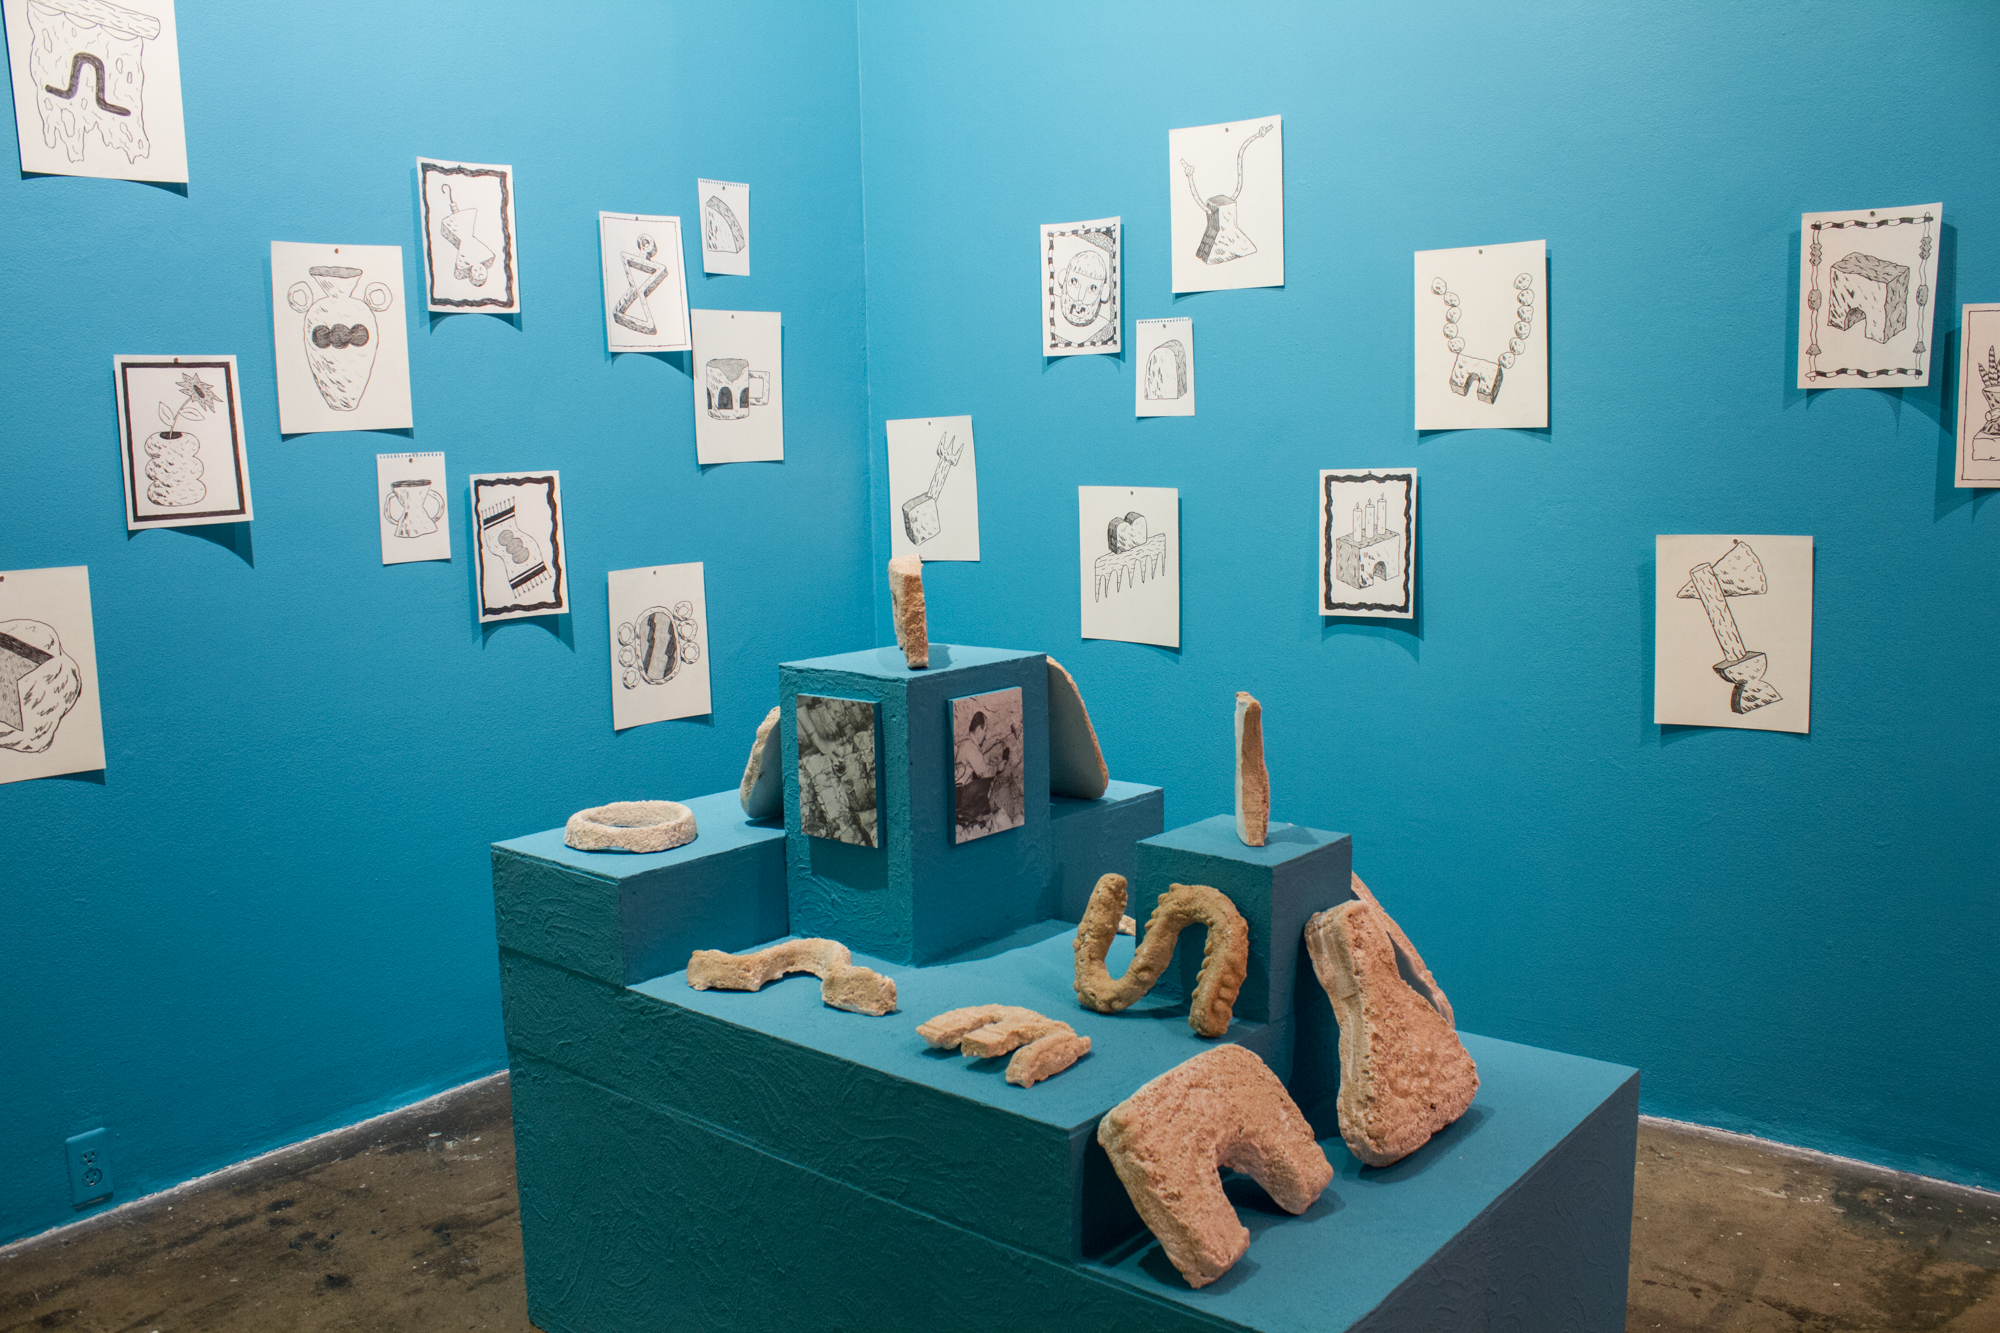 Installation view. Rand Renfrow, More Findings, 2020.